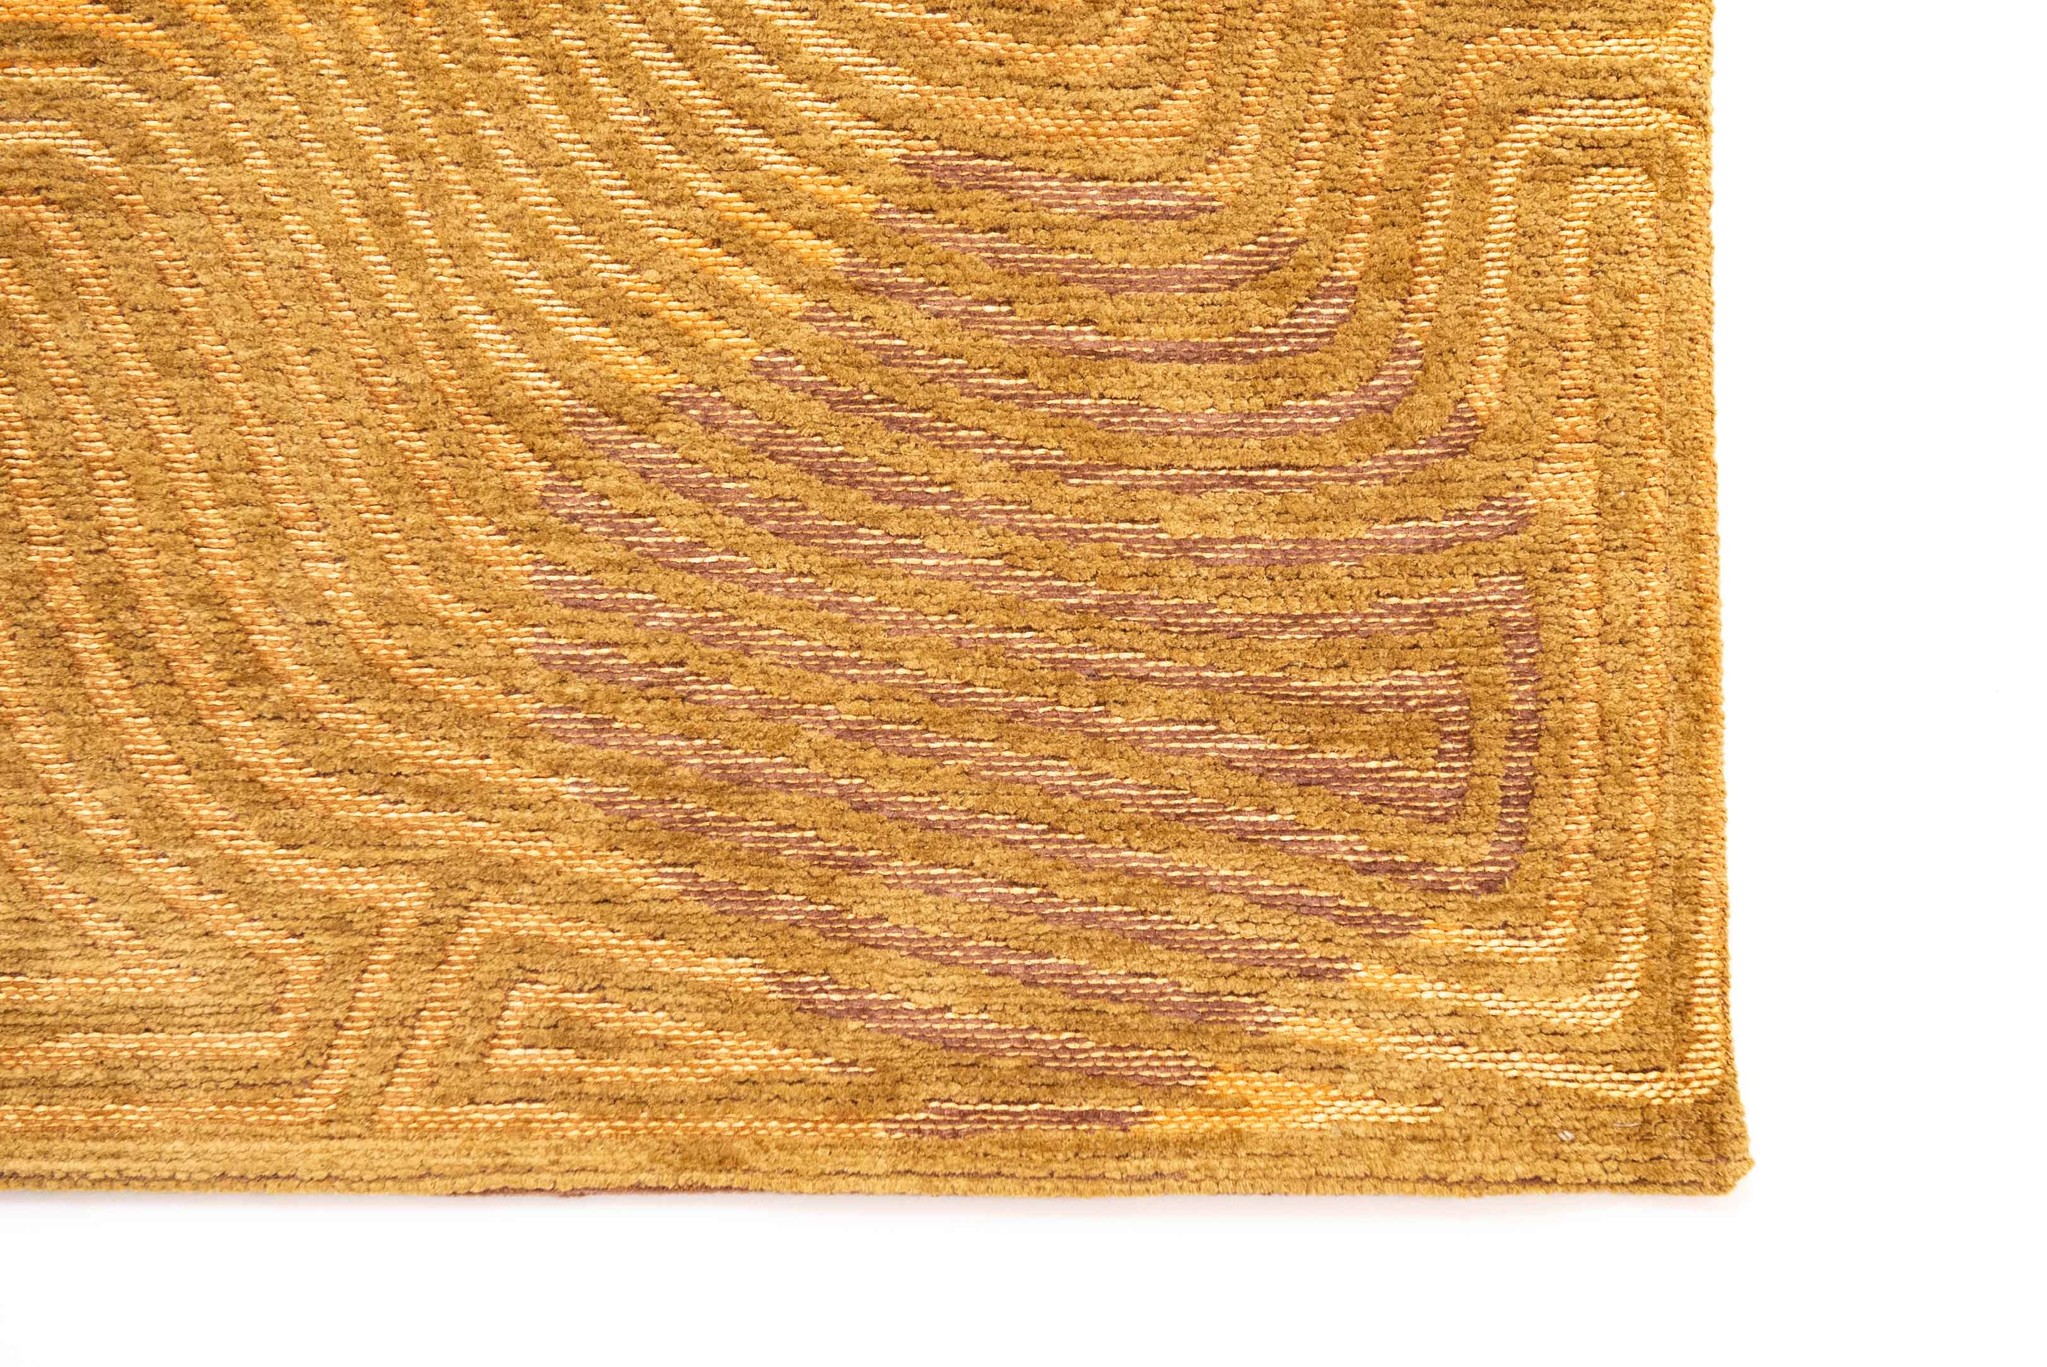 Gold Flatwoven Rug ☞ Size: 9' 2" x 13' (280 x 390 cm)